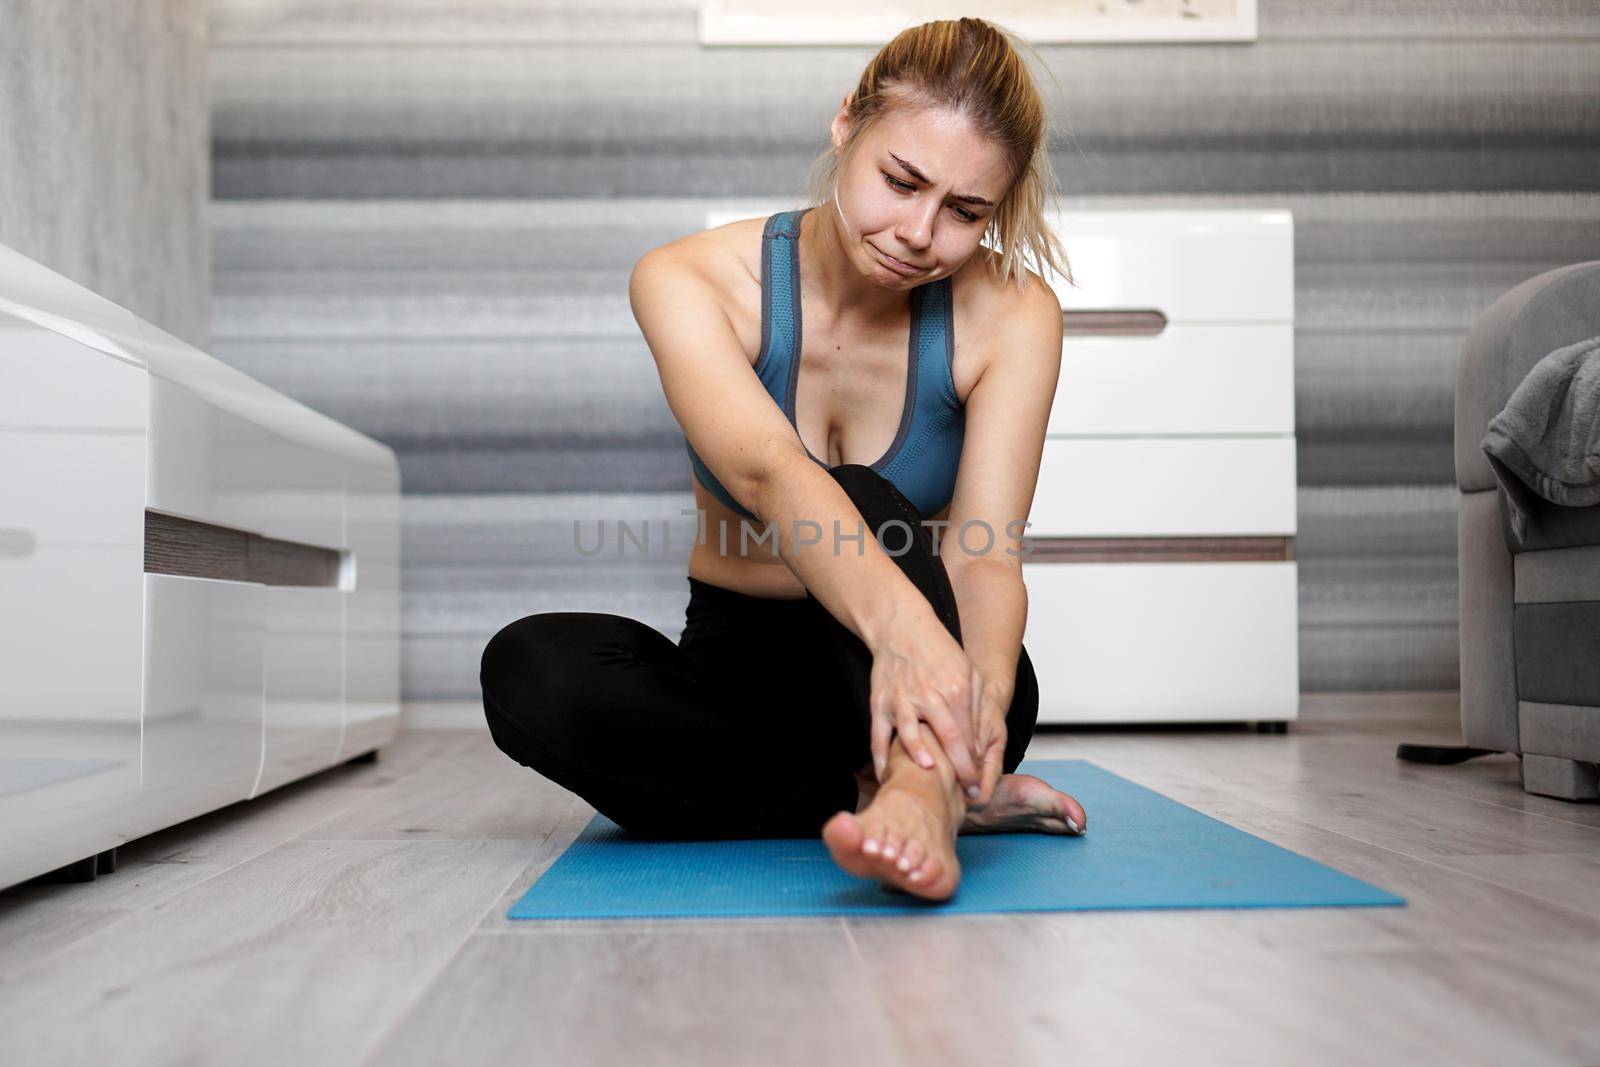 Unhappy woman sitting on the yoga mat with ankle injury, feeling pain. Health care and execise concept.